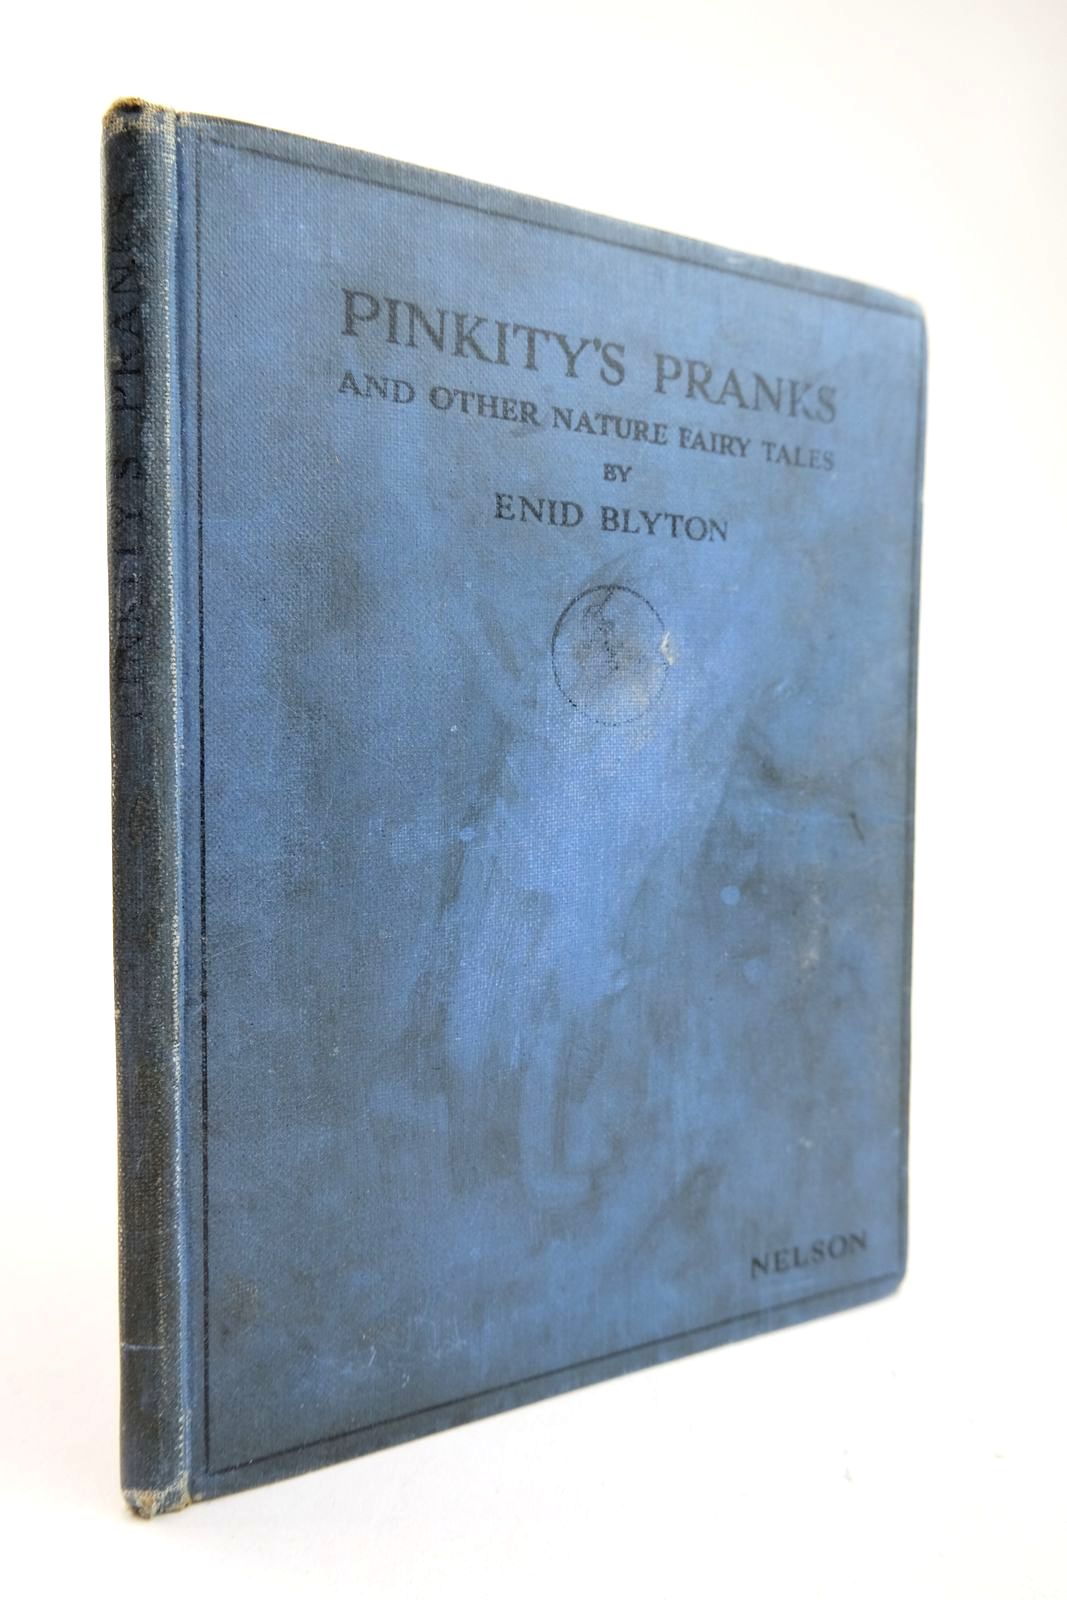 Photo of PINKITY'S PRANKS AND OTHER NATURE FAIRY TALES written by Blyton, Enid published by Thomas Nelson and Sons Ltd. (STOCK CODE: 2133405)  for sale by Stella & Rose's Books